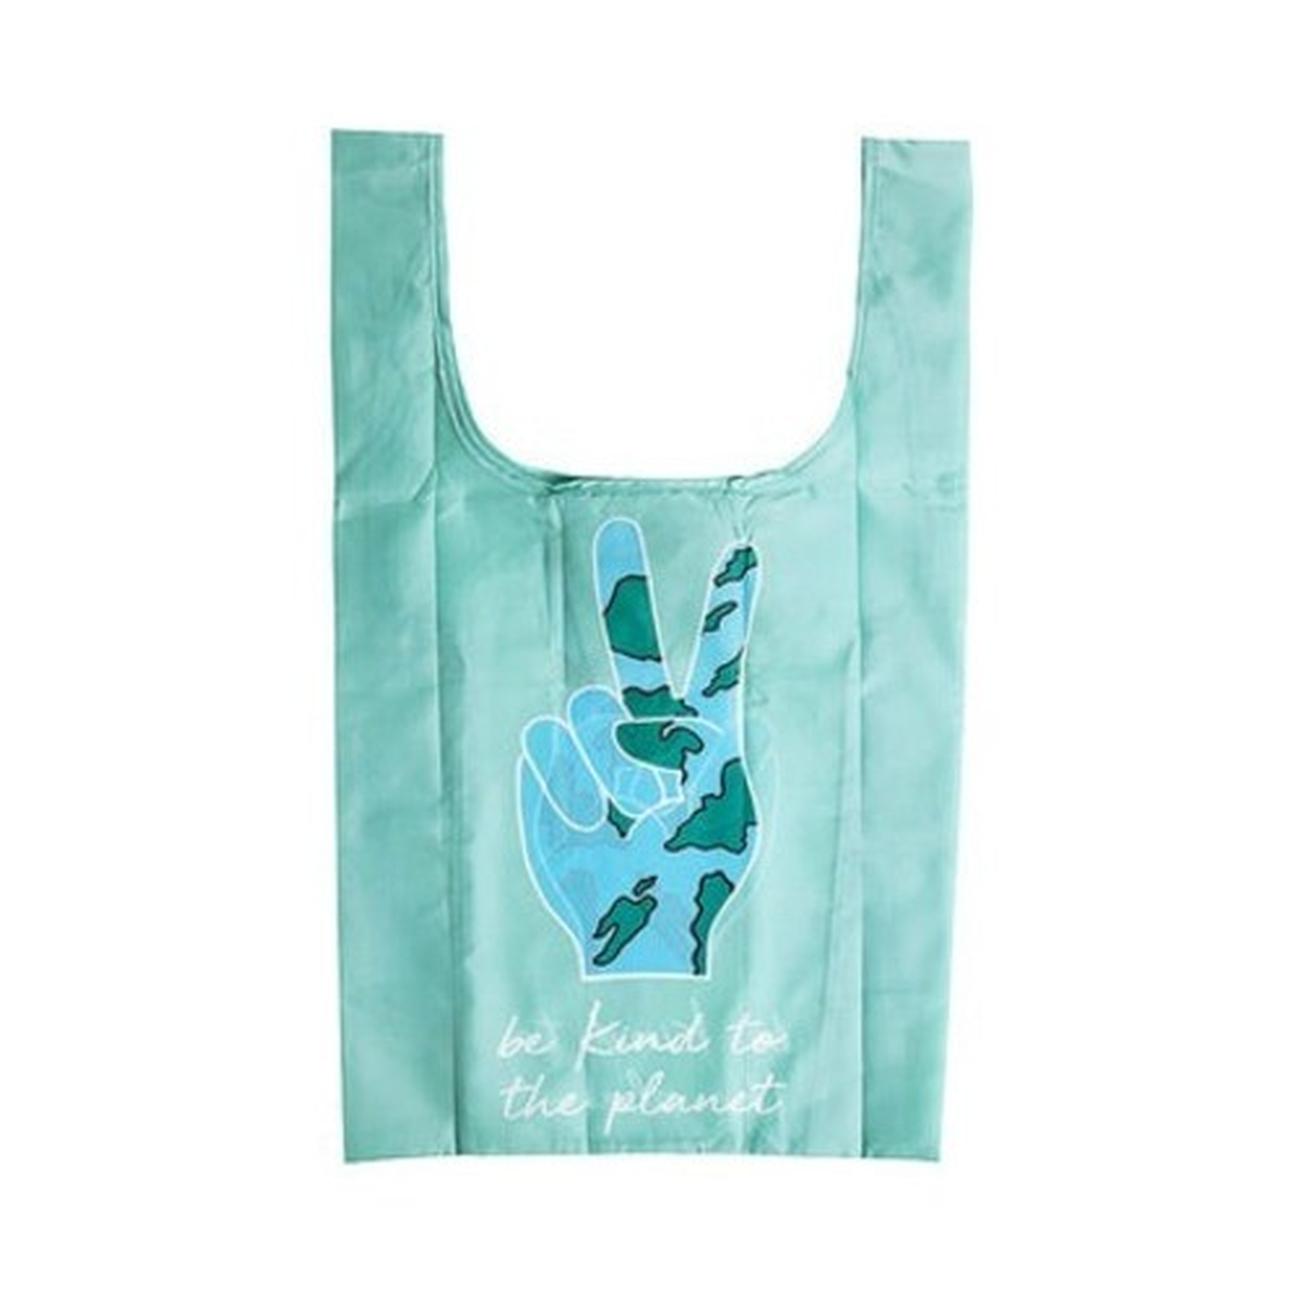 ladelle-eco-recycled-bag-kind-to-the-planet - Ladelle Eco Recycled Bag Kind To The Planet